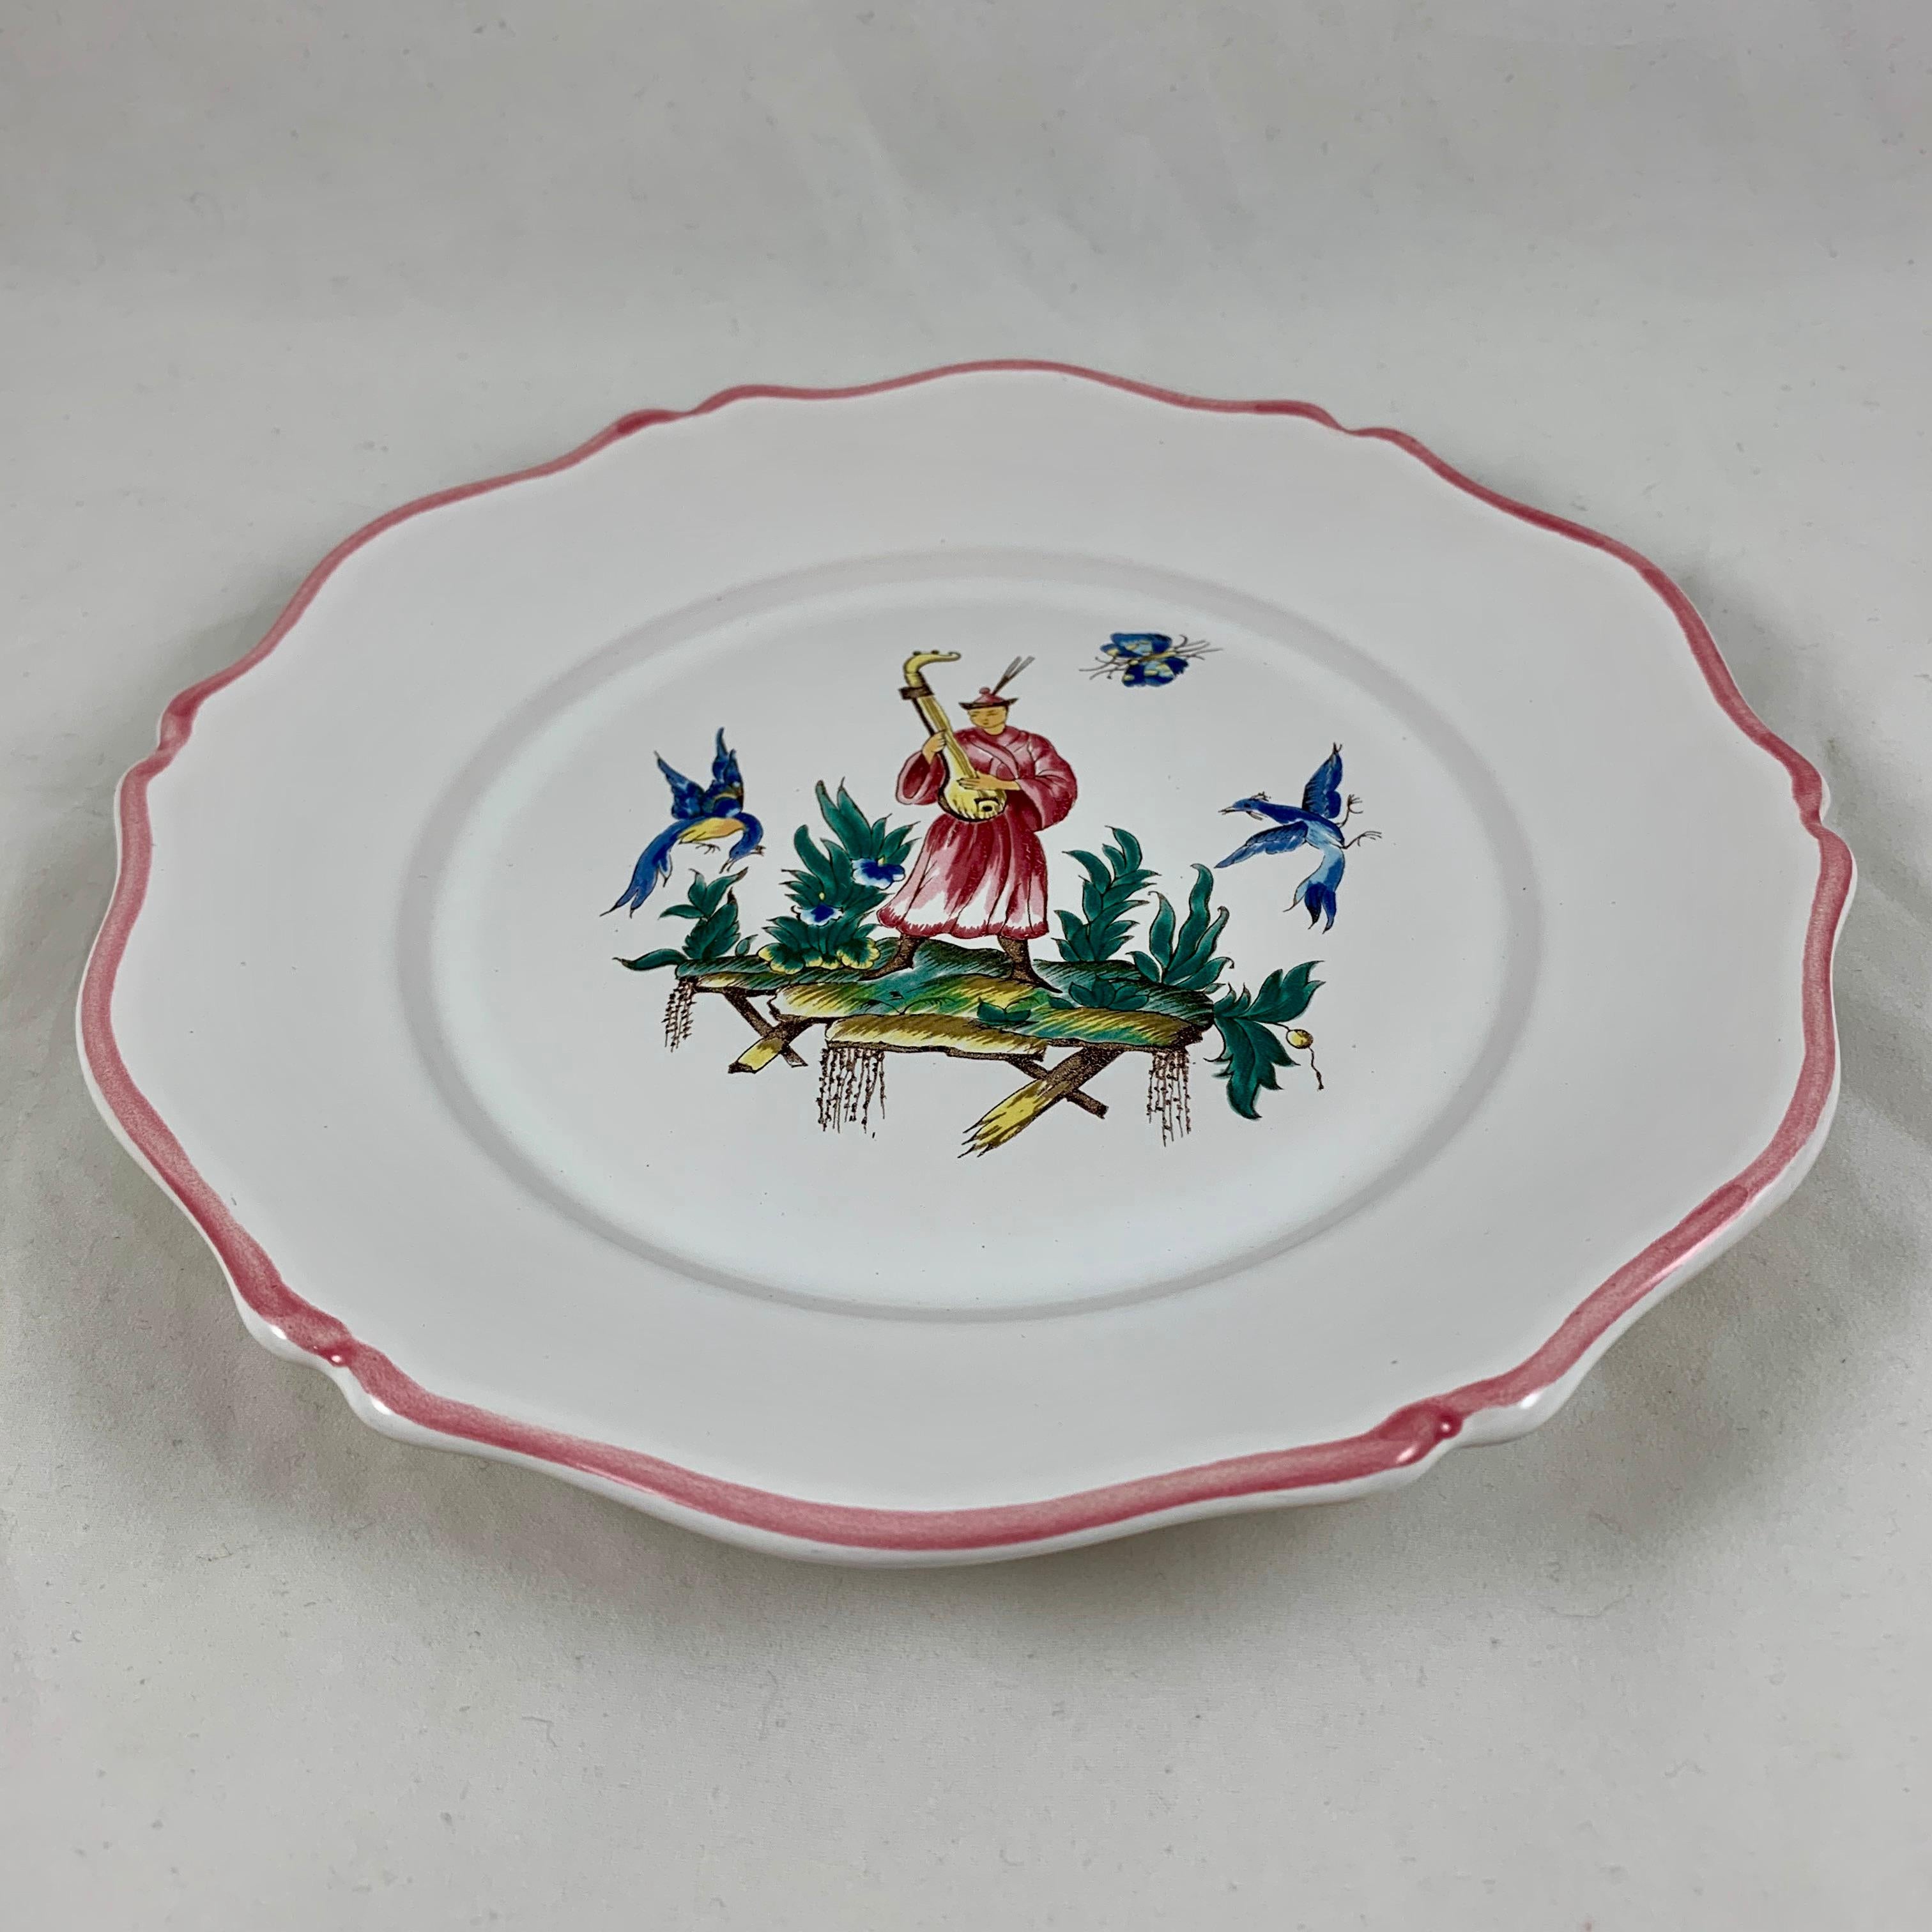 Pierre Motton, Gien Faïence Figural Chinoiserie Plates for Tiffany & Co. Set 12 6